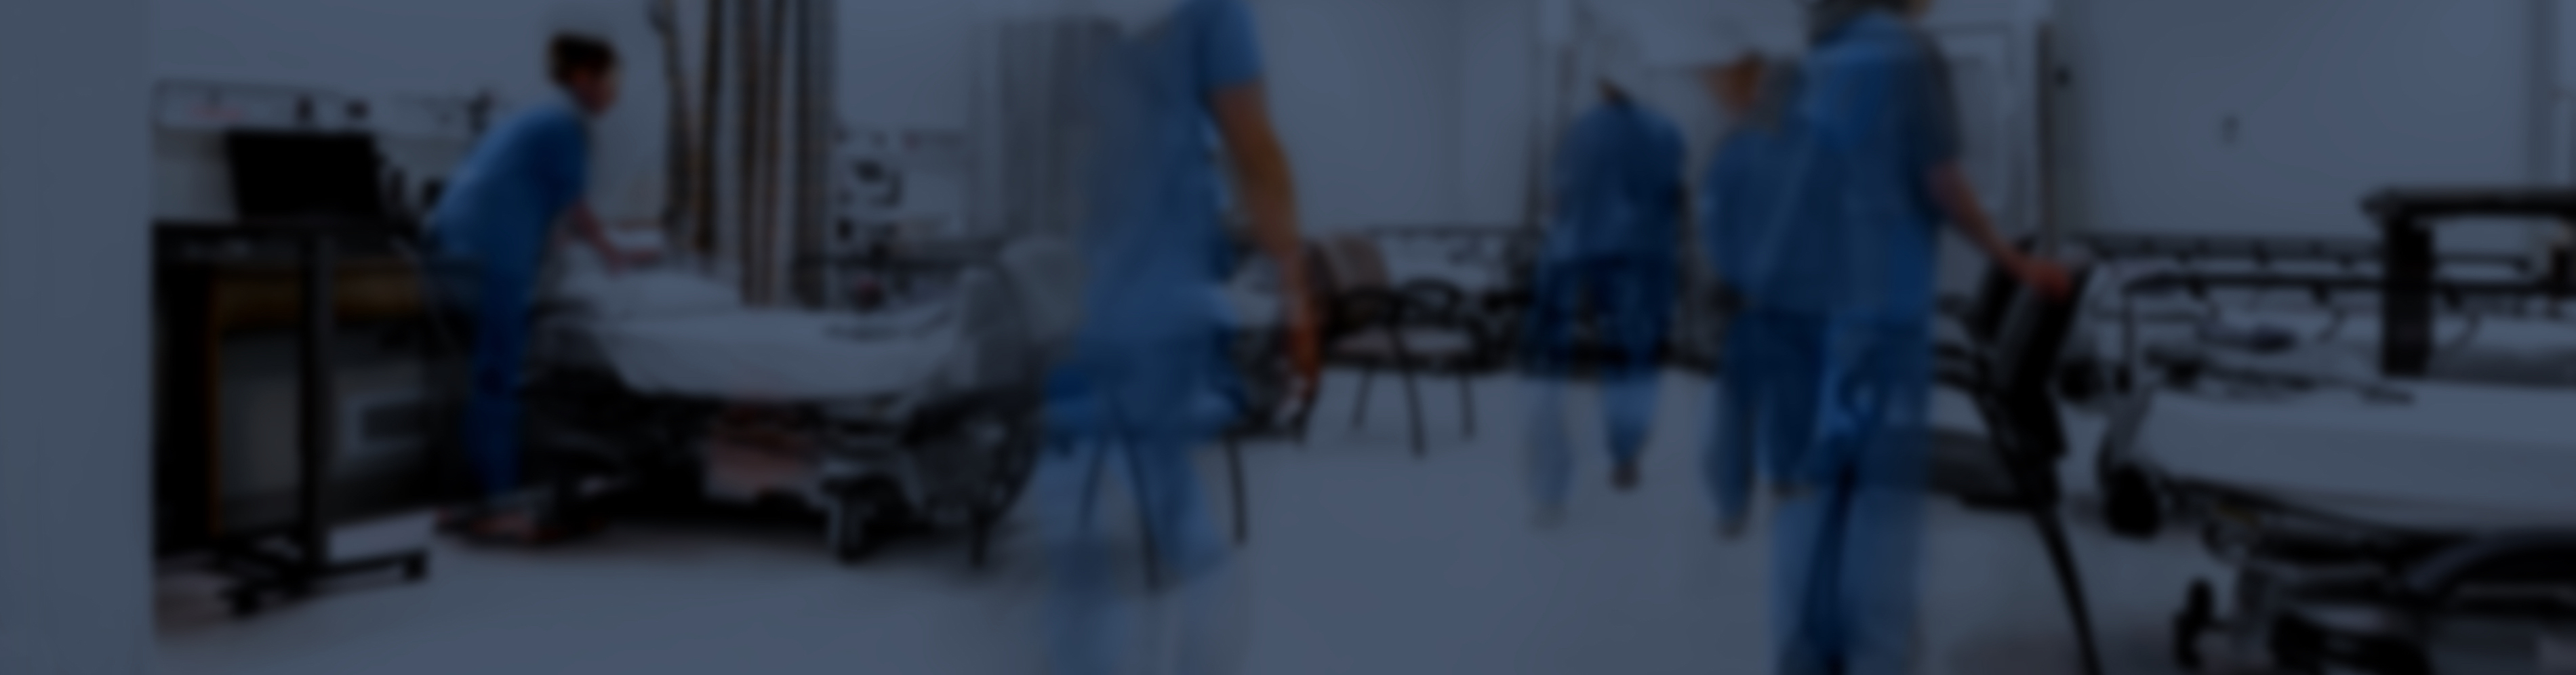 Fuzzy background image of healthcare professionals setting up large hospital room